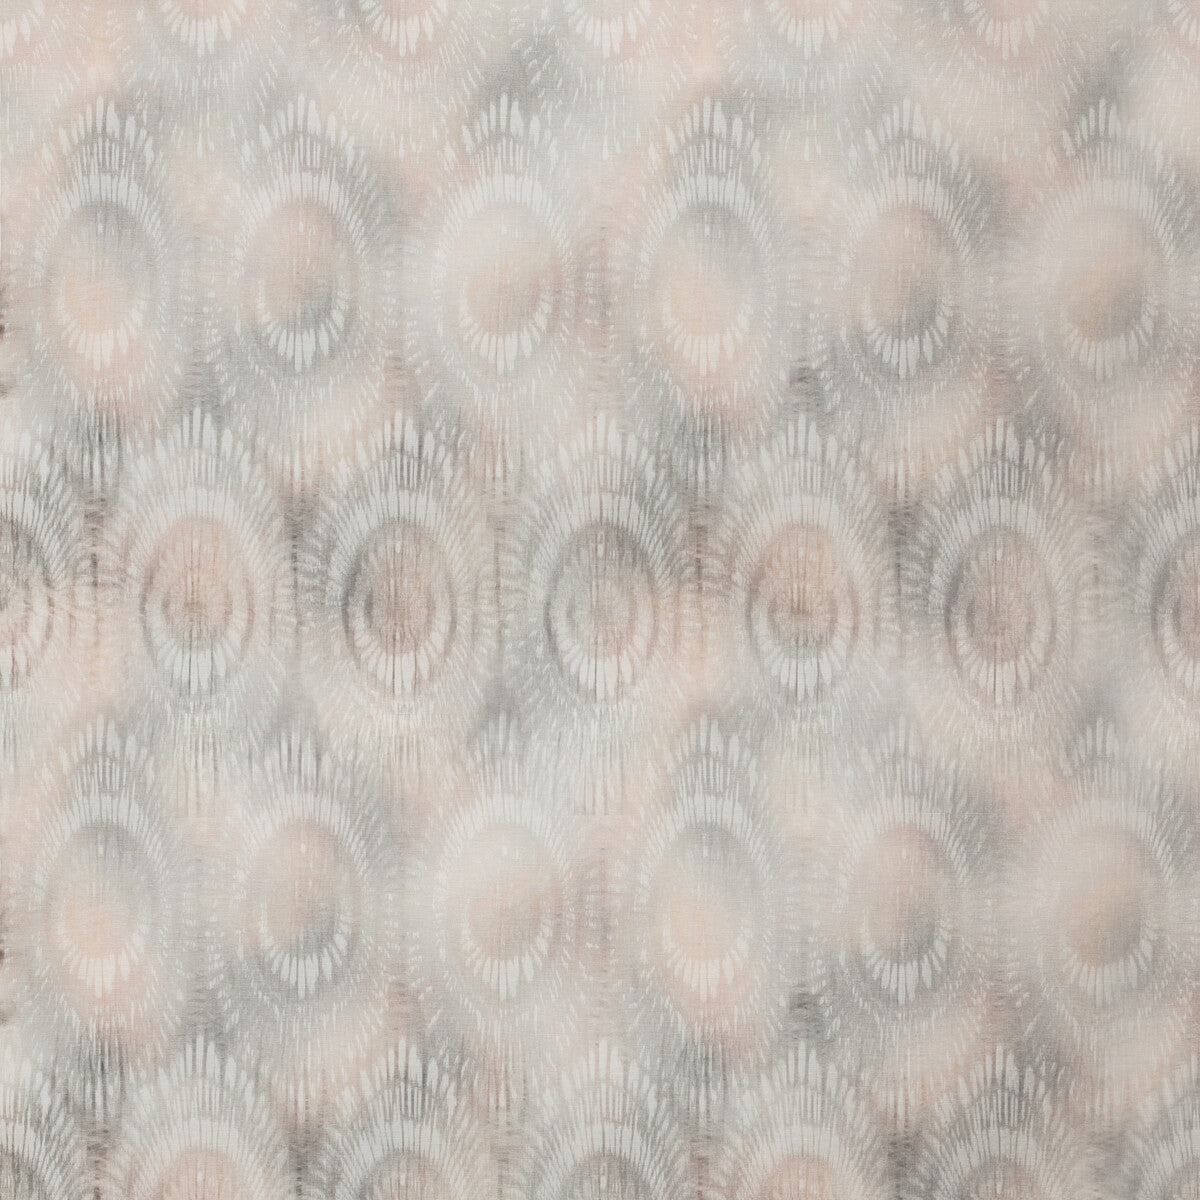 Delta Nile fabric in wisp color - pattern DELTA NILE.16.0 - by Kravet Couture in the Windsor Smith Naila collection